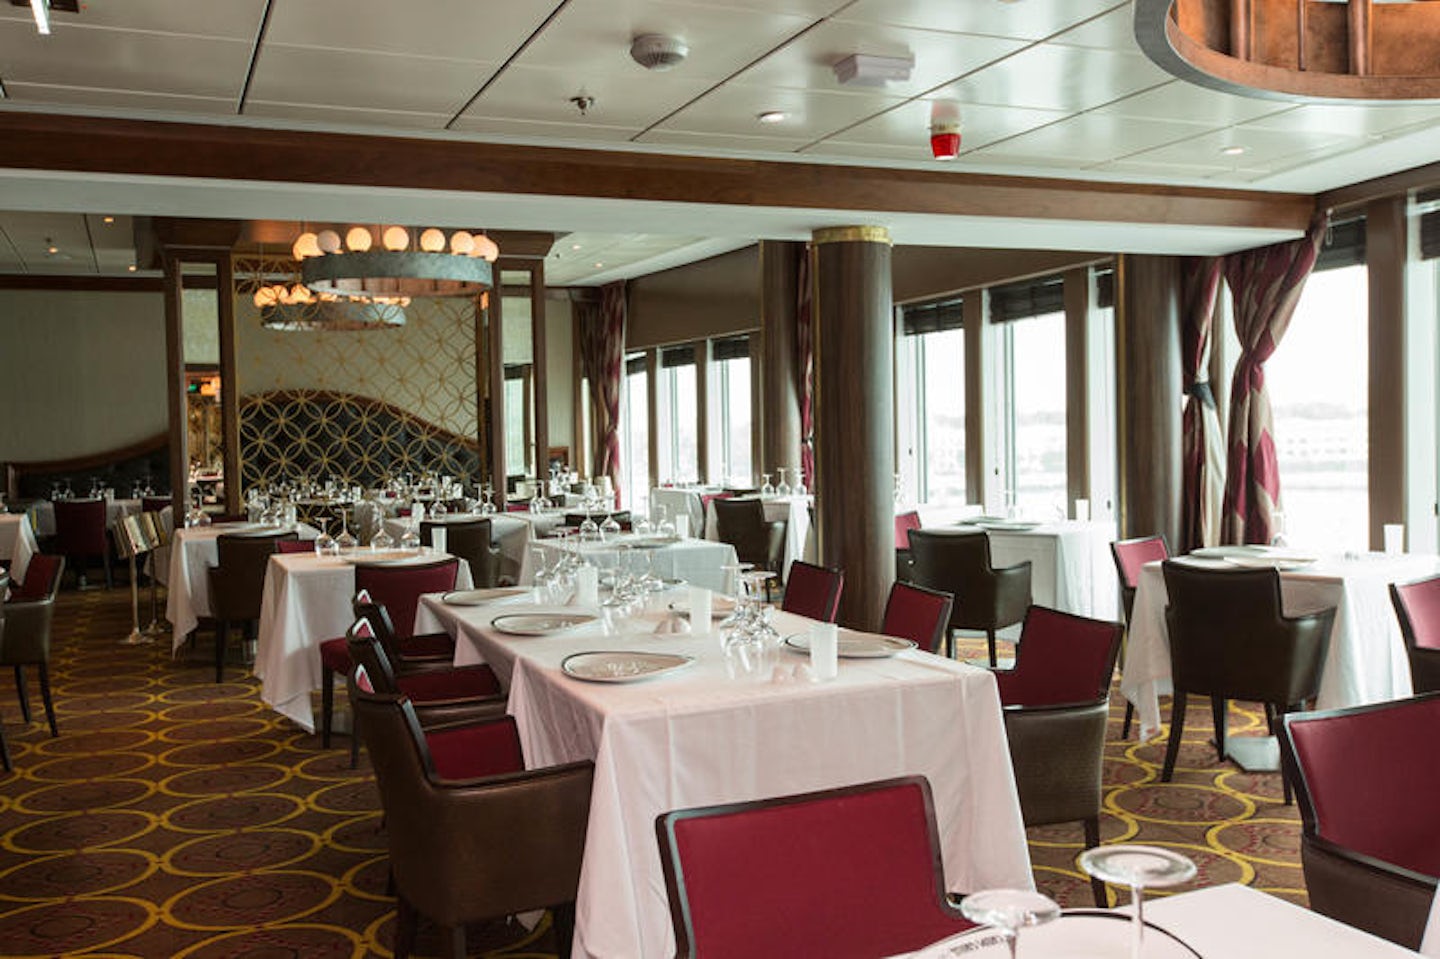 Chops Grille on Vision of the Seas